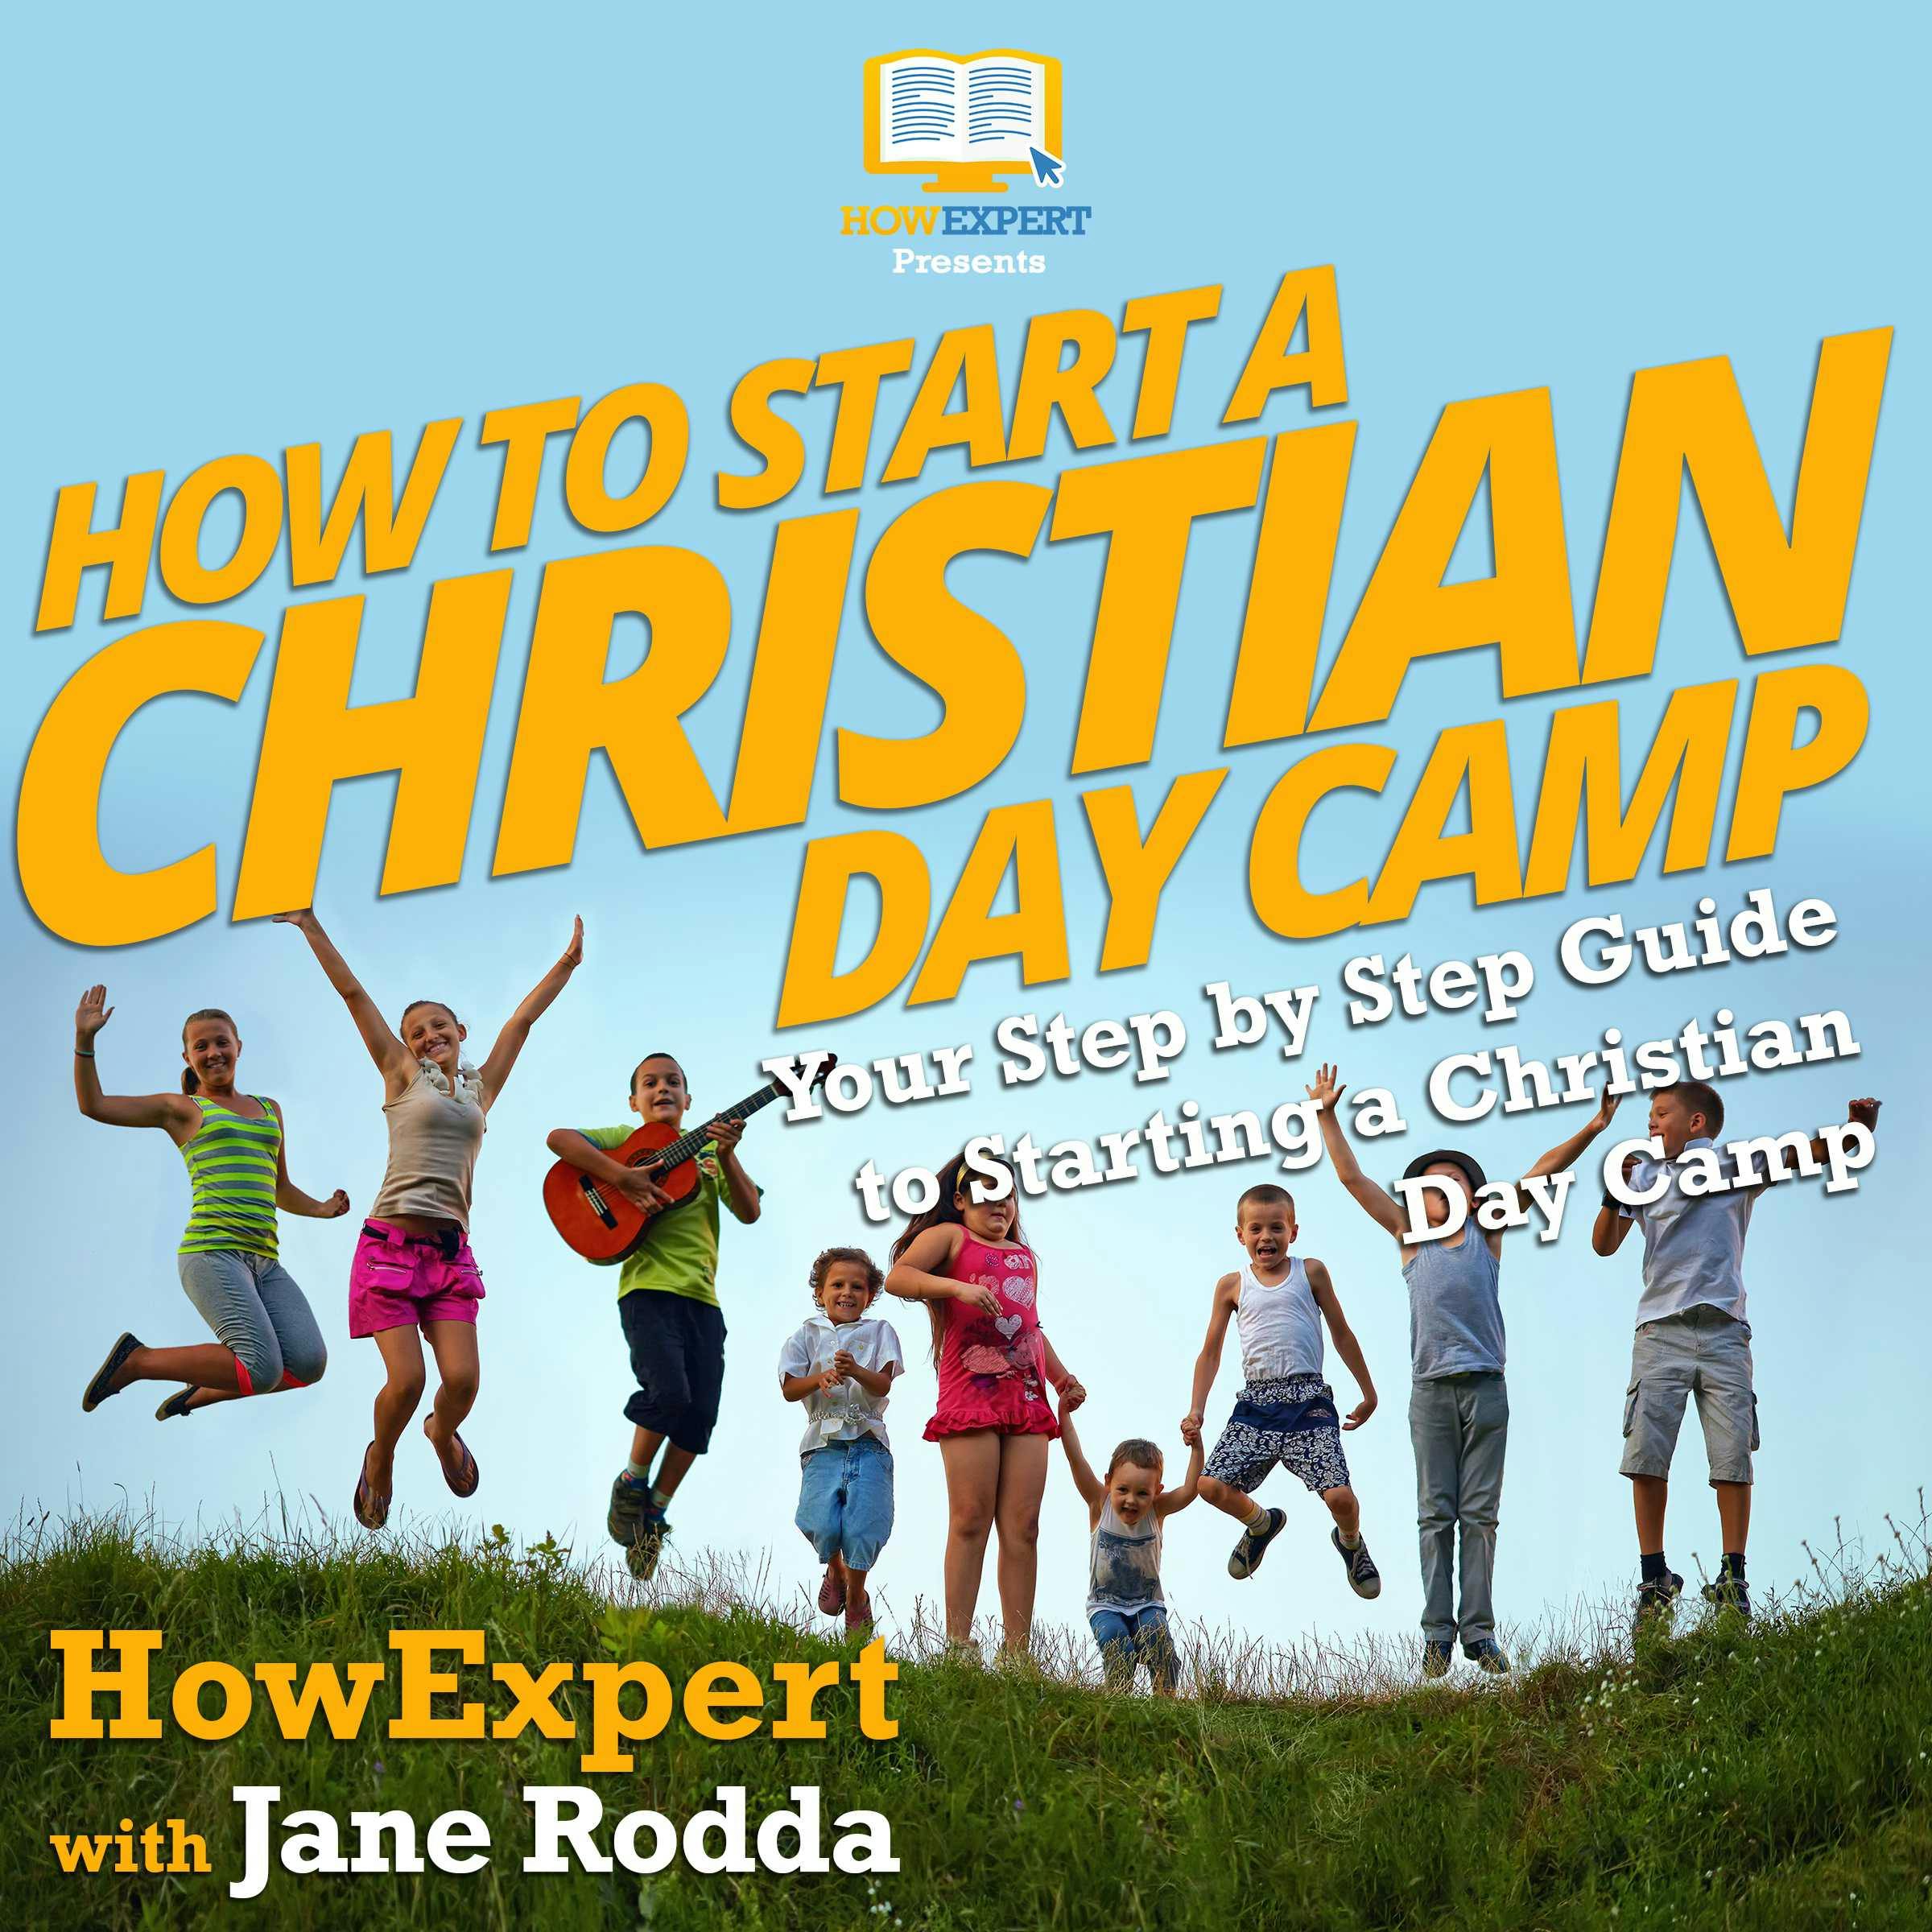 How To Start a Christian Day Camp: Your Step By Step Guide To Starting a Christian Day Camp - Jane Rodda, HowExpert